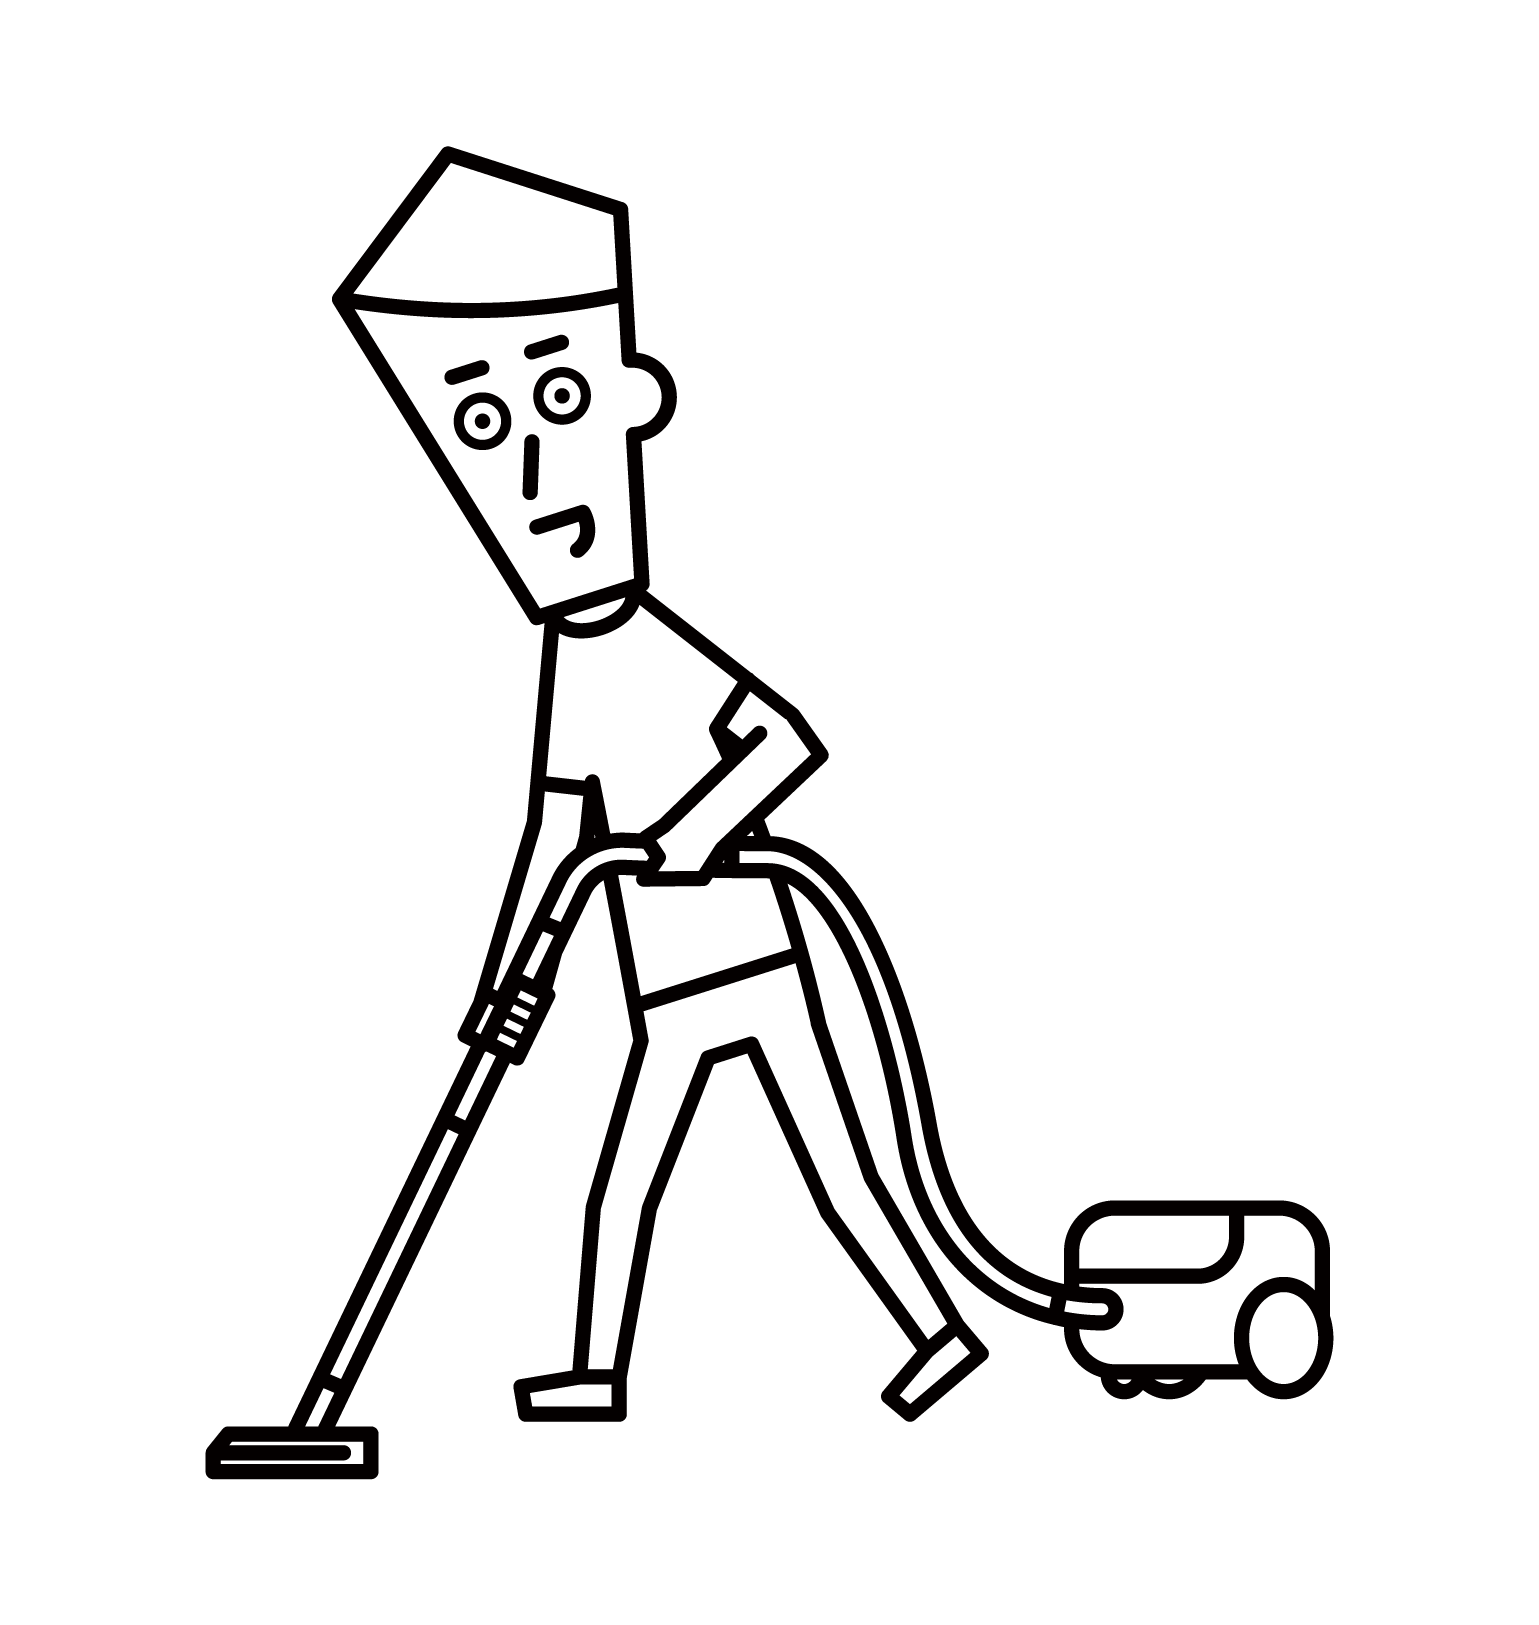 Illustration of a man using a vacuum cleaner